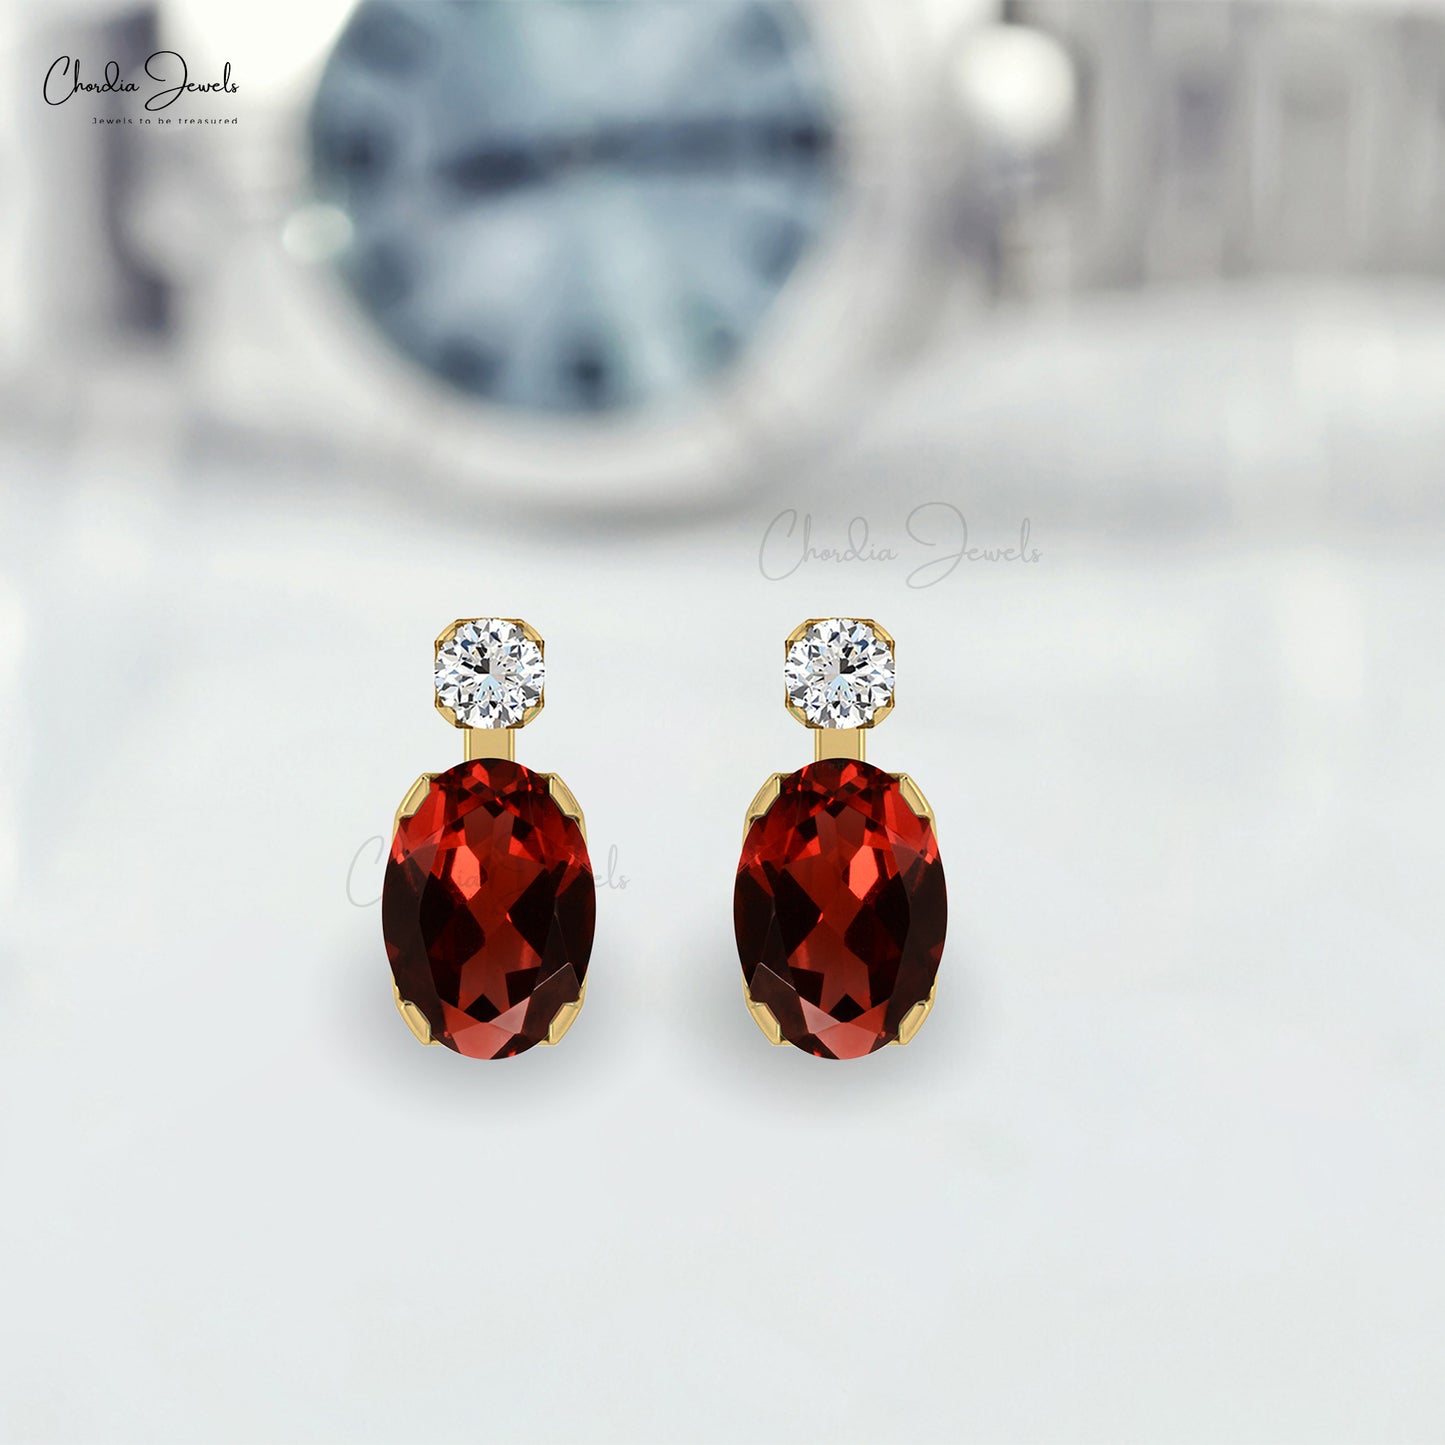 Red Garnet 7x5mm Oval Cut Stud Earrings For Gift Genuine 14k Real Gold White Diamond Grace Jewelry For Bridesmaid Gift